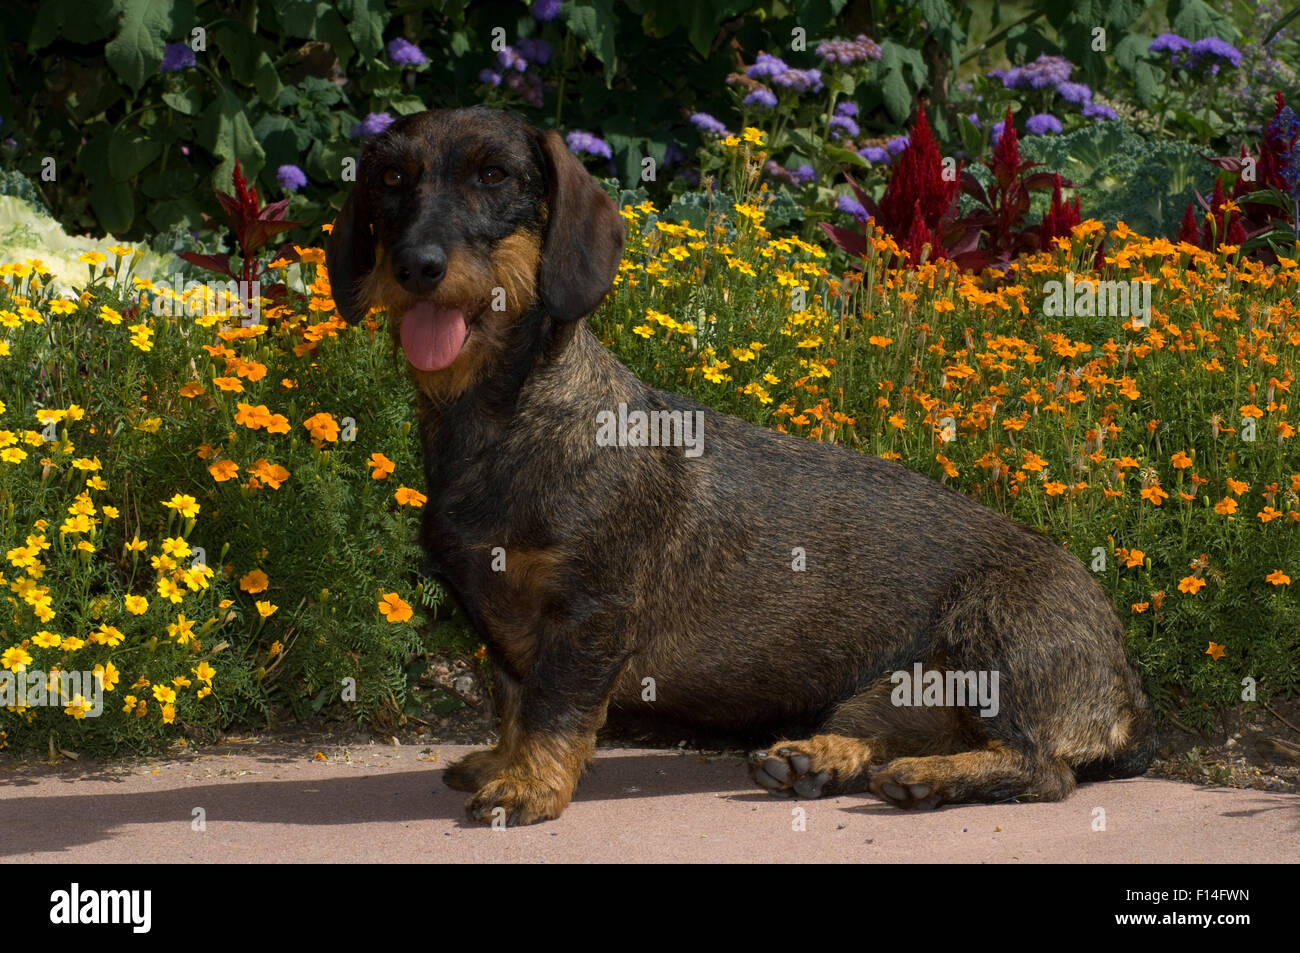 WIRE-HAIRED DACHSHUND SITTING IN FRONT OF FLOWERS Stock Photo